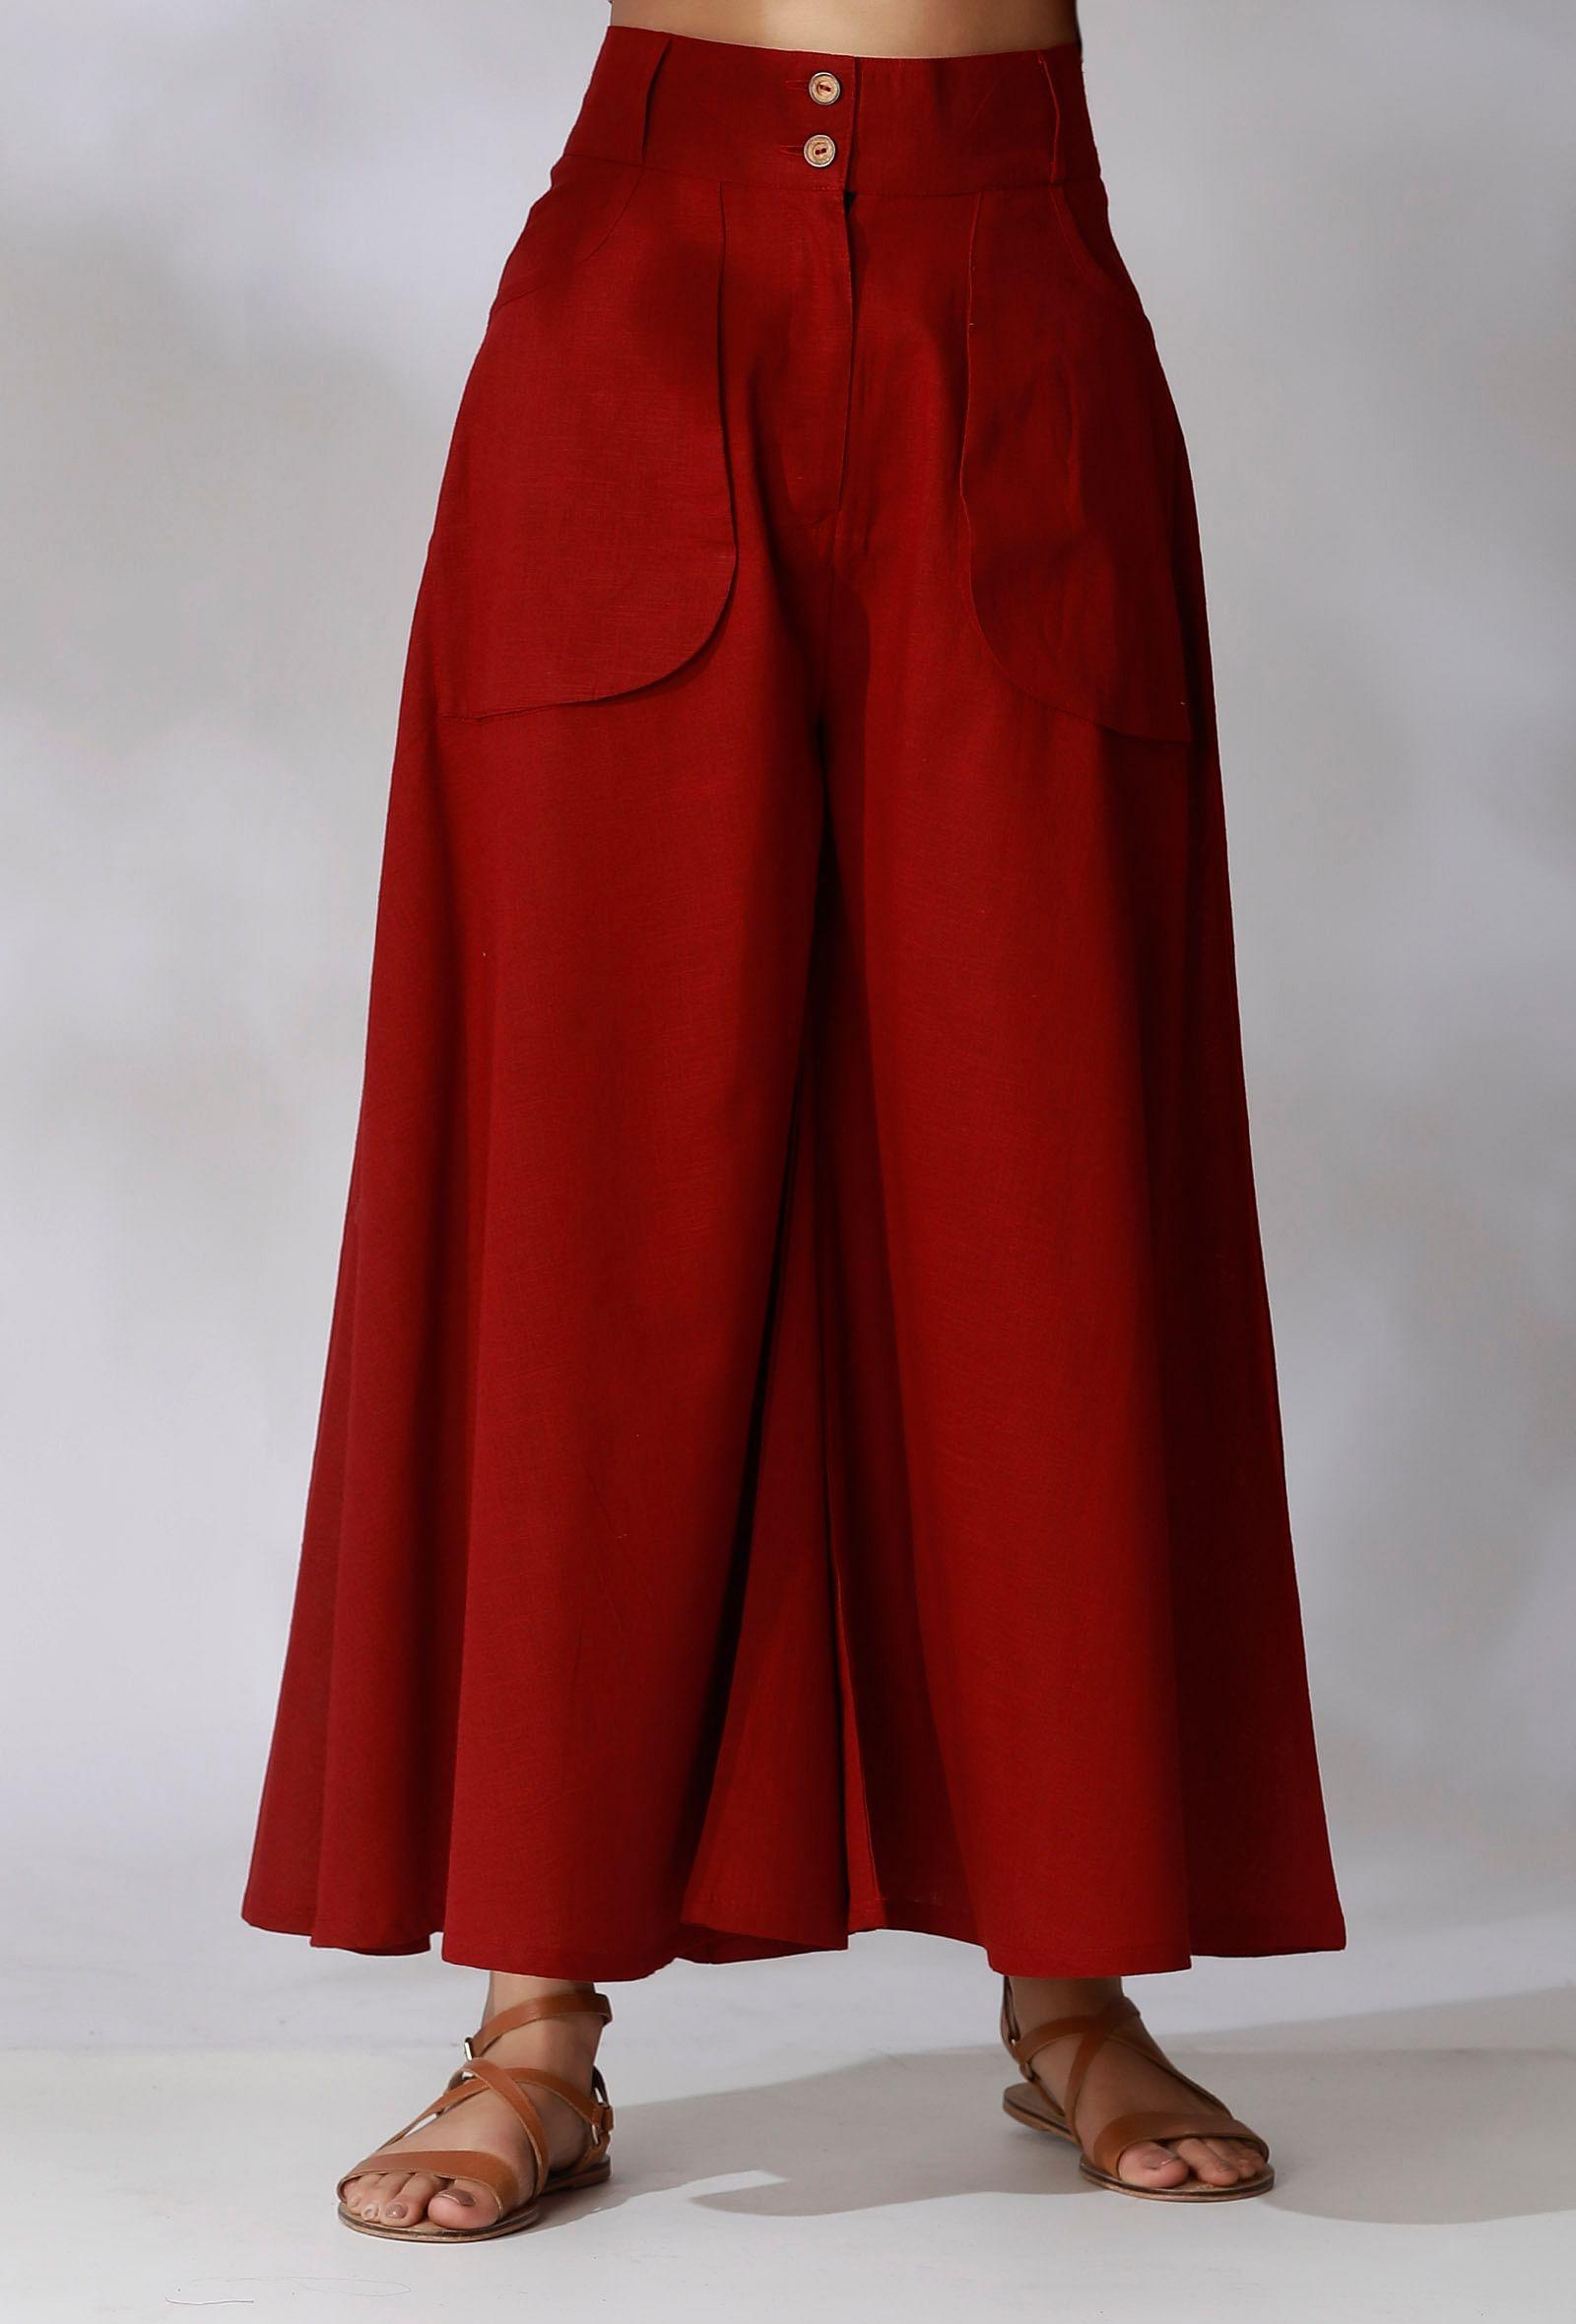 maroon high waist pants with front pockets